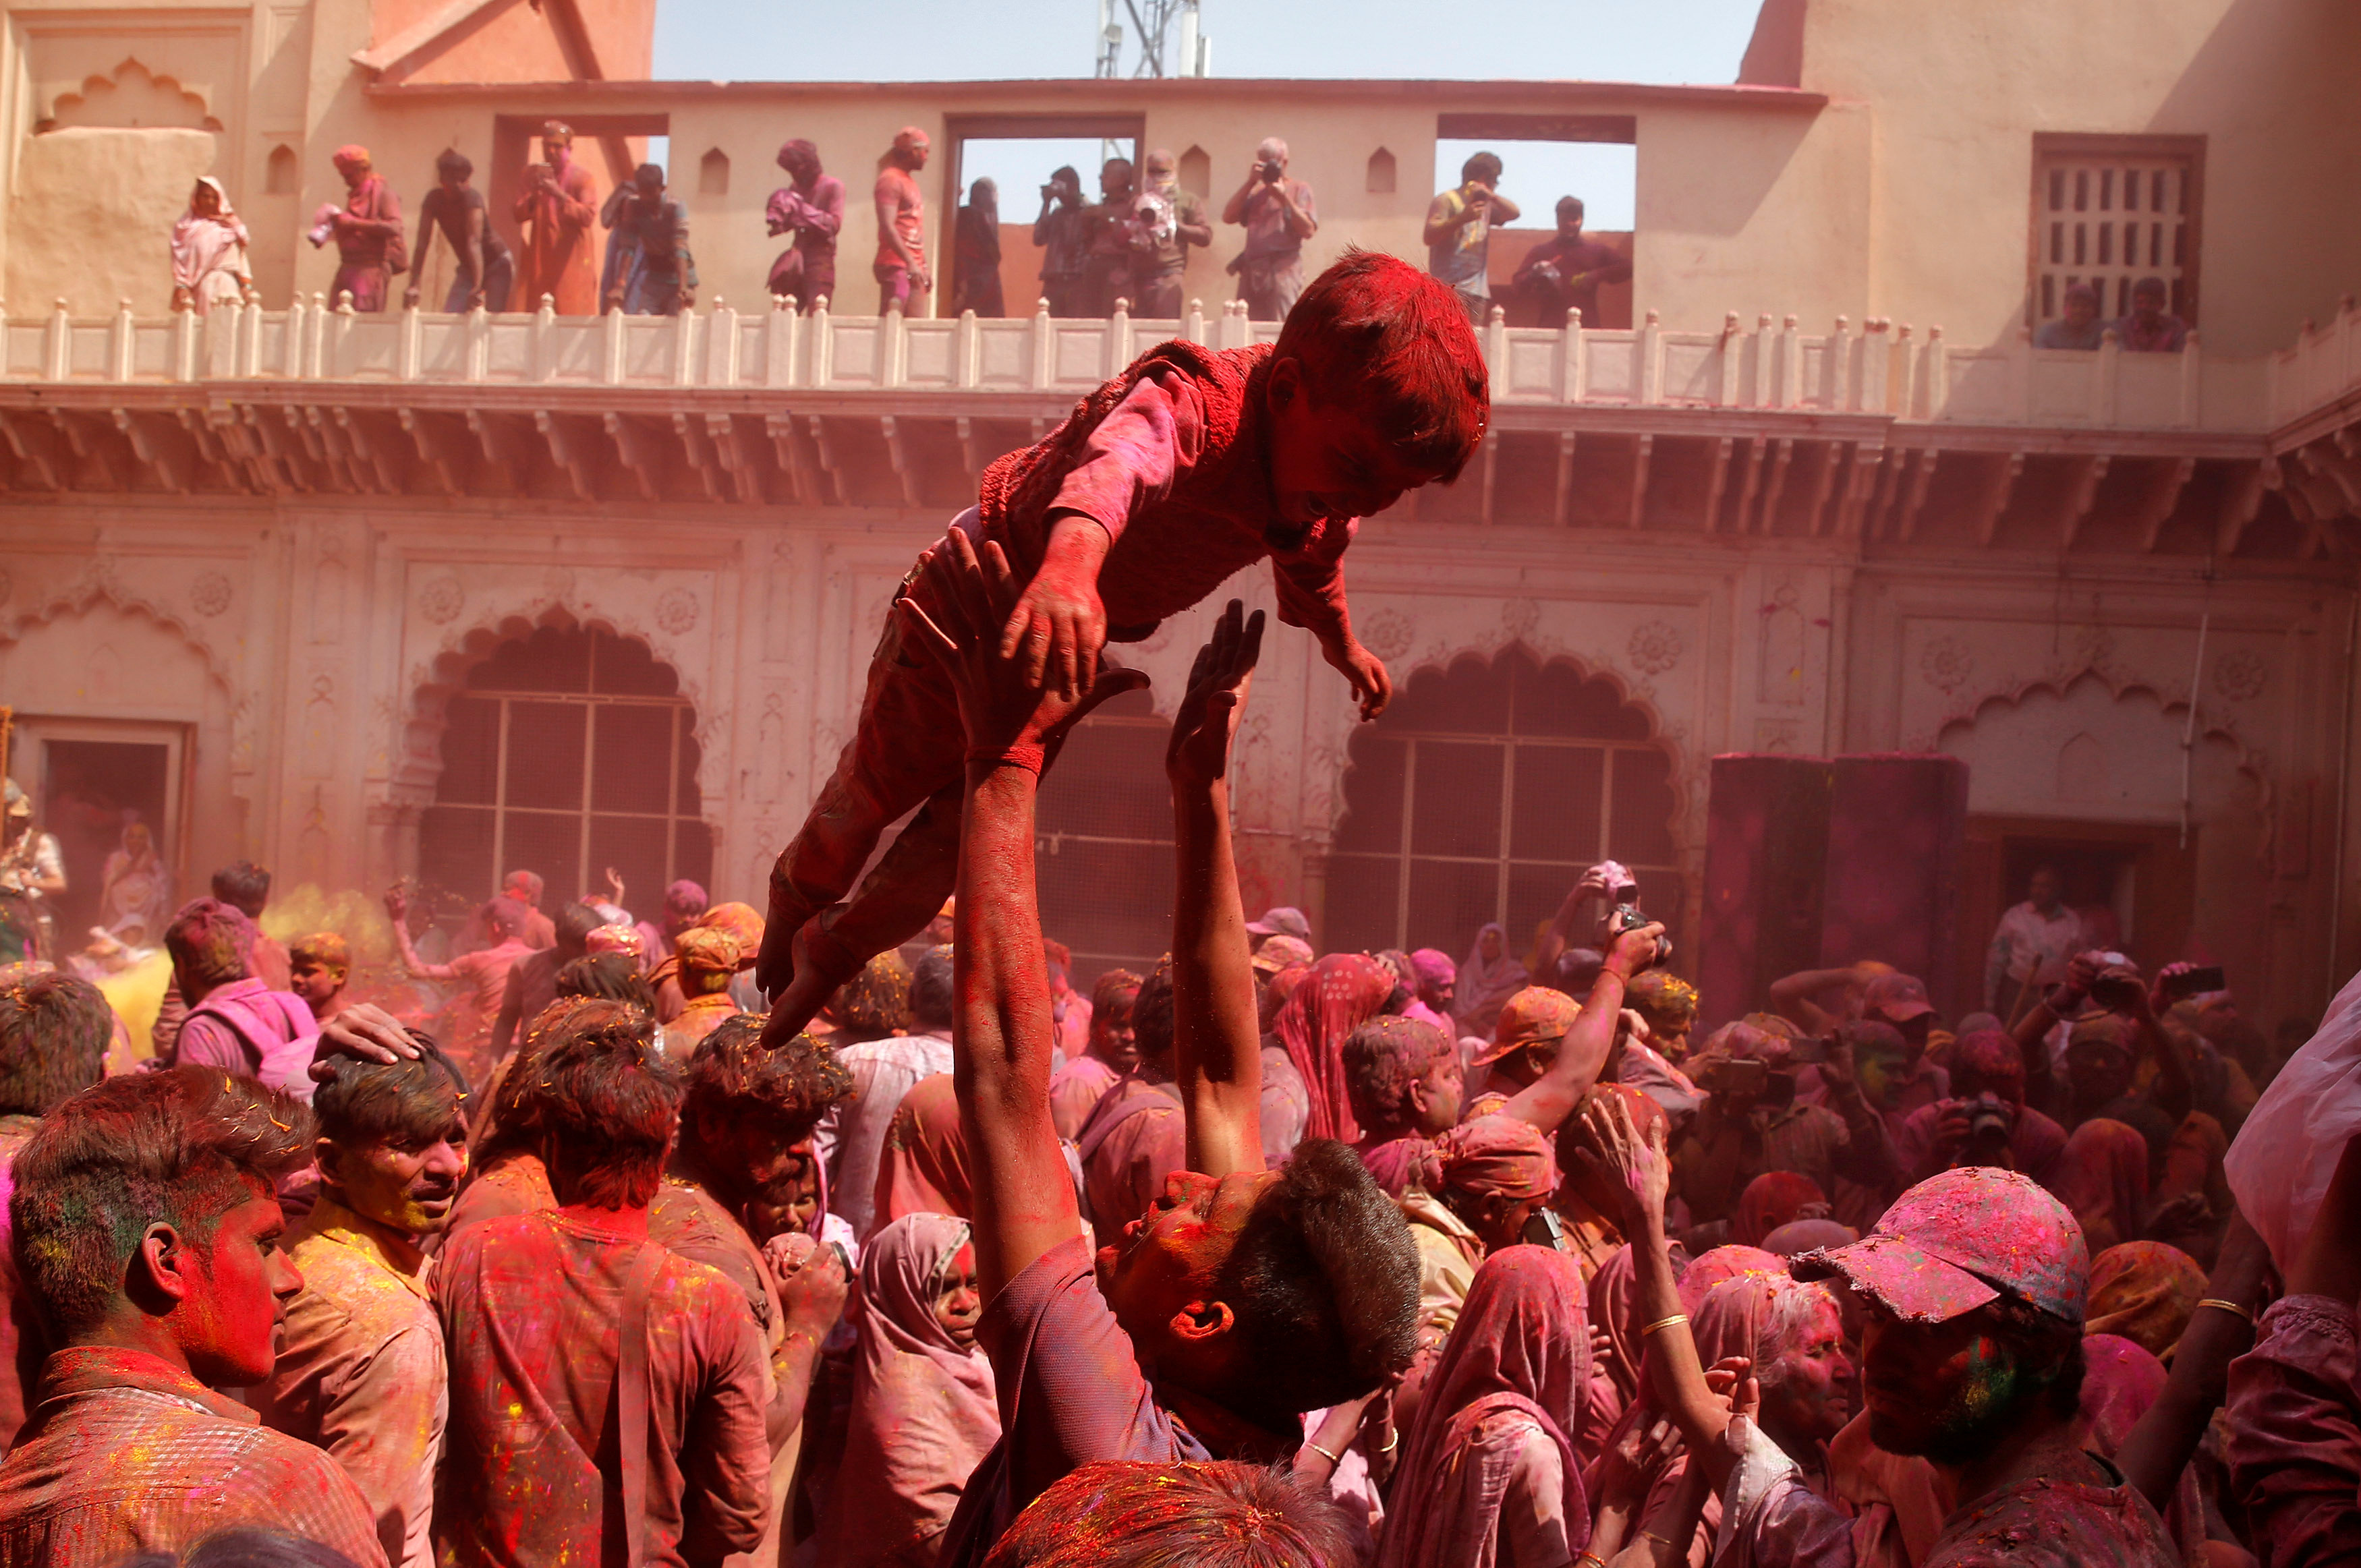 People take part in Holi celebrations in the town of Vrindavan in the northern state of Uttar Pradesh, India. PHOTO: REUTERS